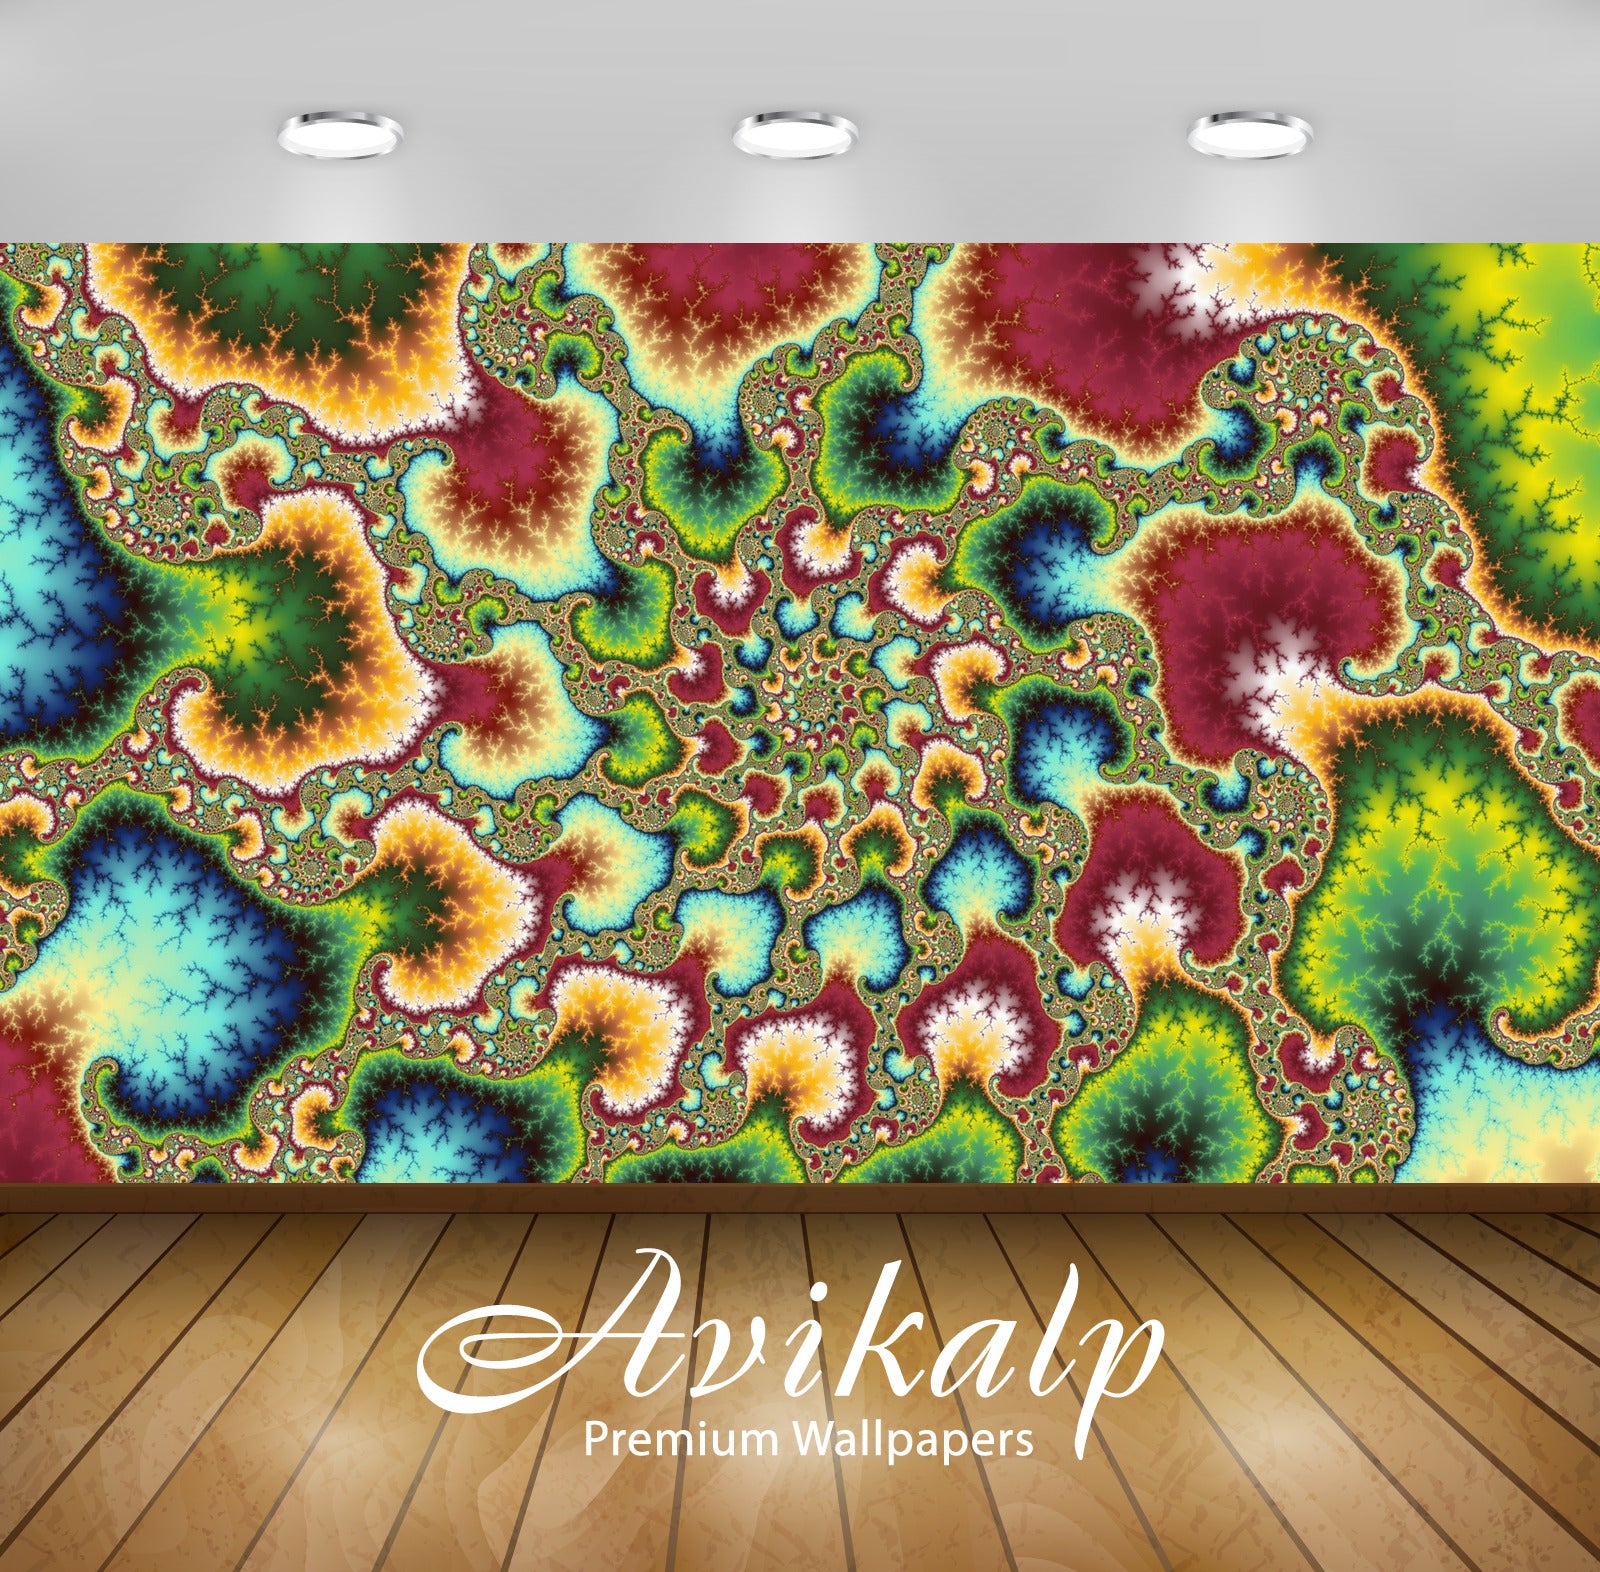 Avikalp Exclusive Awi4570 Psychedelic Fractal Design Full HD Wallpapers for Living room, Hall, Kids